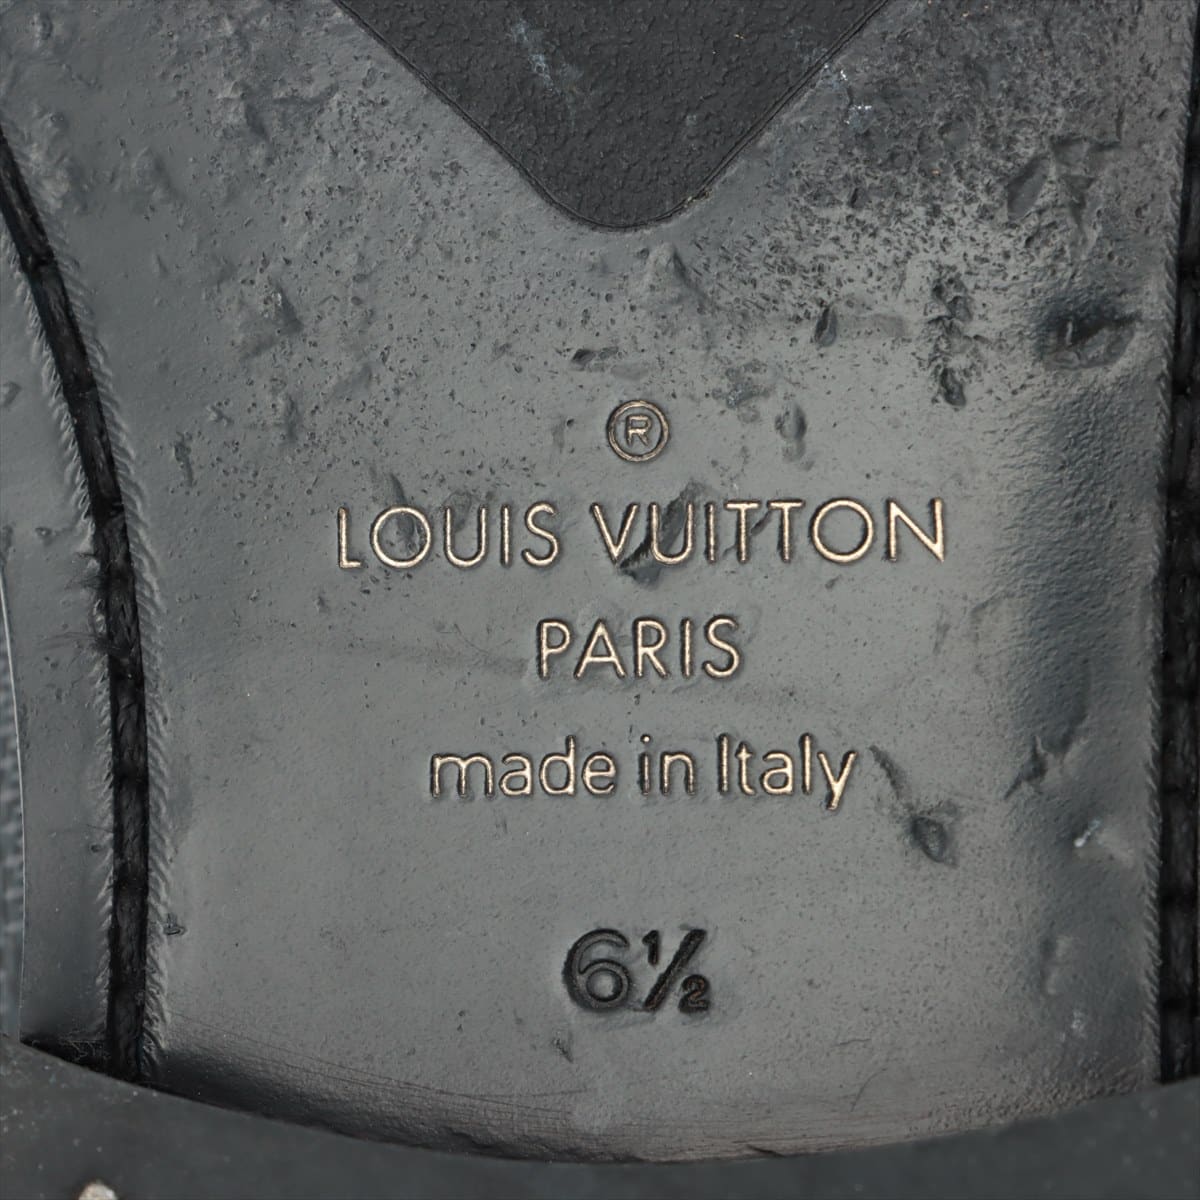 LOUIS VUITTON 6h ブラック MADE IN ITALY